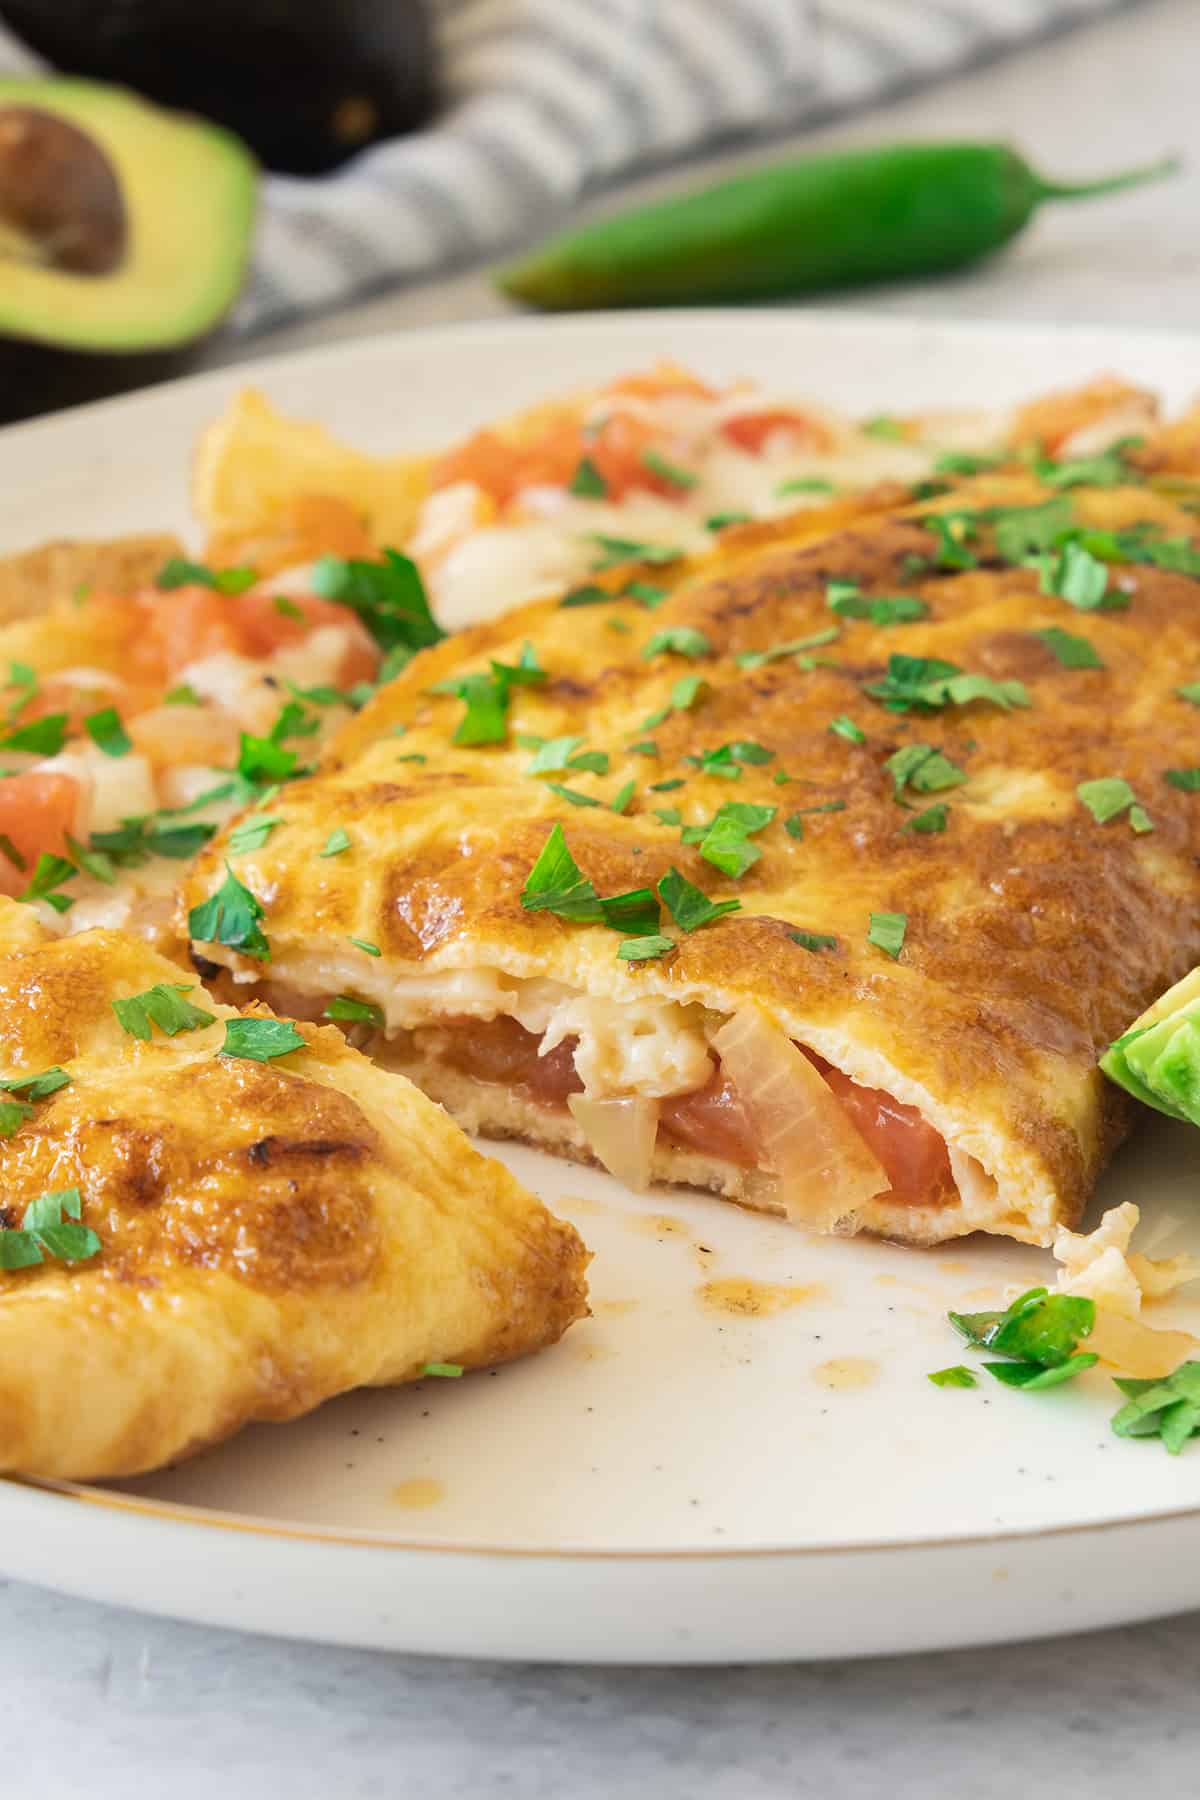 A Mexican omelet cut in half and topped with chopped cilantro.